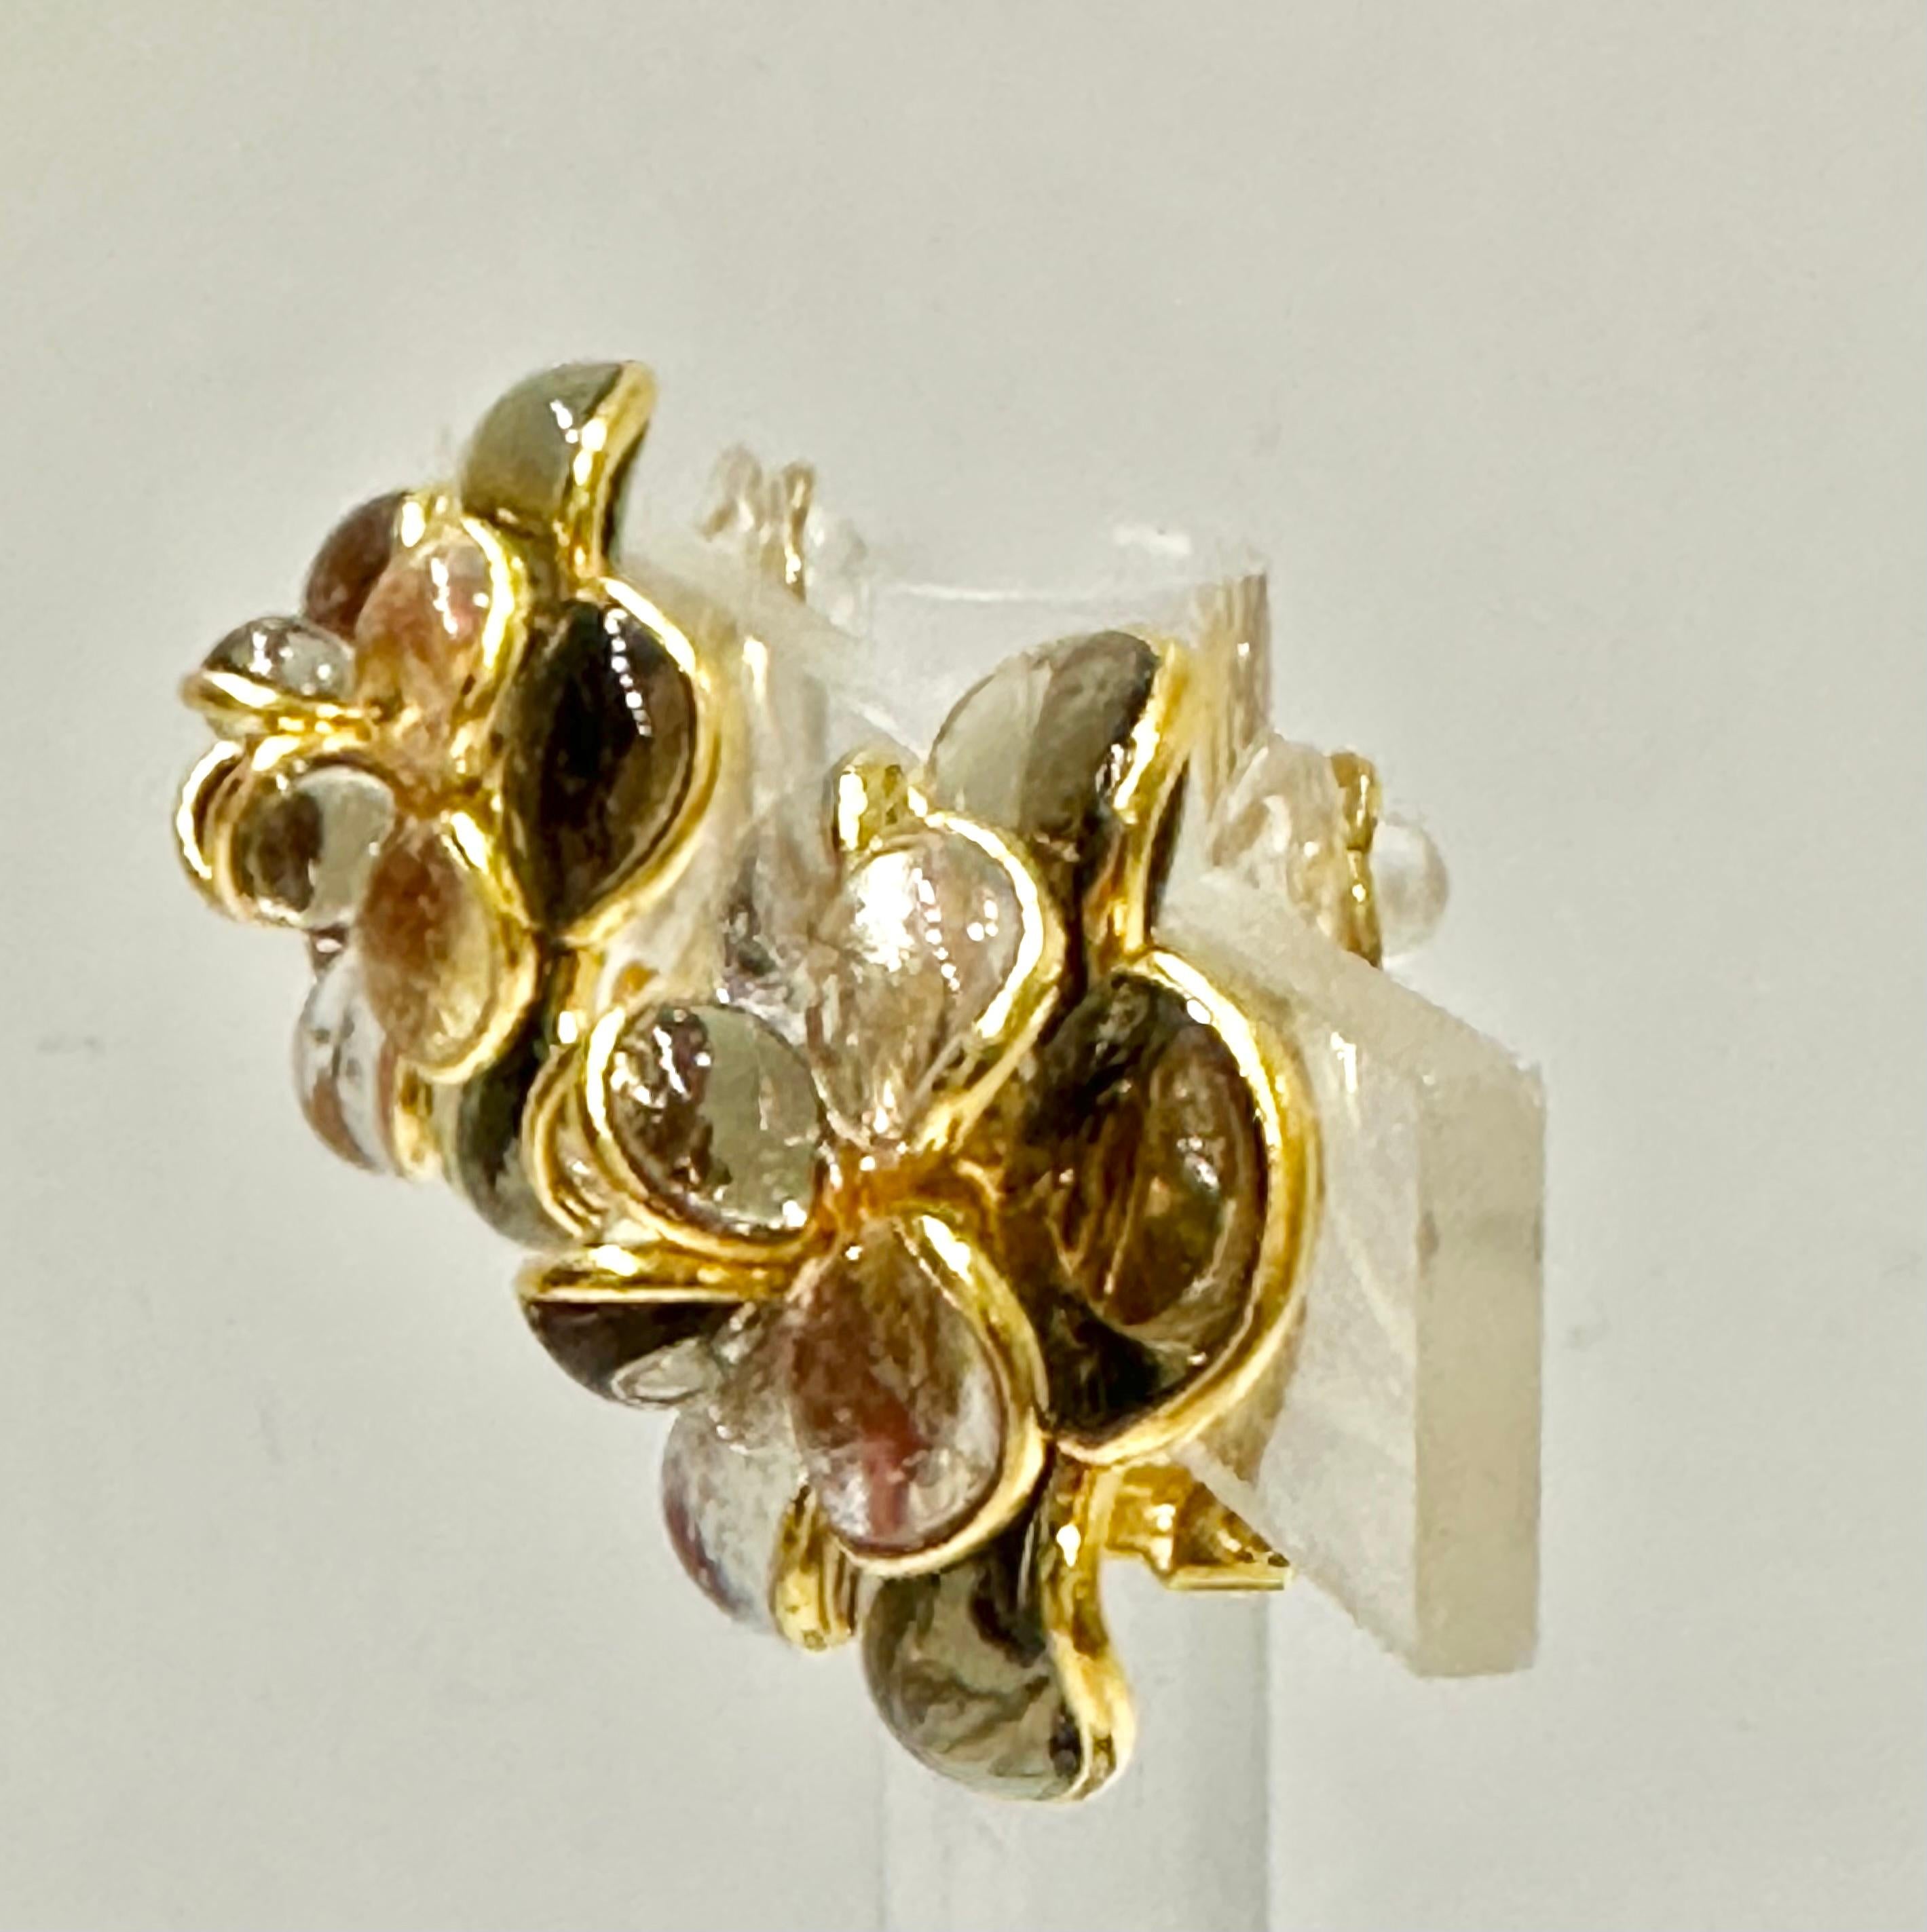 designed by the former artisans of the atelier of Gripoix, made in the special process of pate de verre or poured glass. Gold leaves are inserted in the glass. 18-carat gilded brass.
Clip earrings 